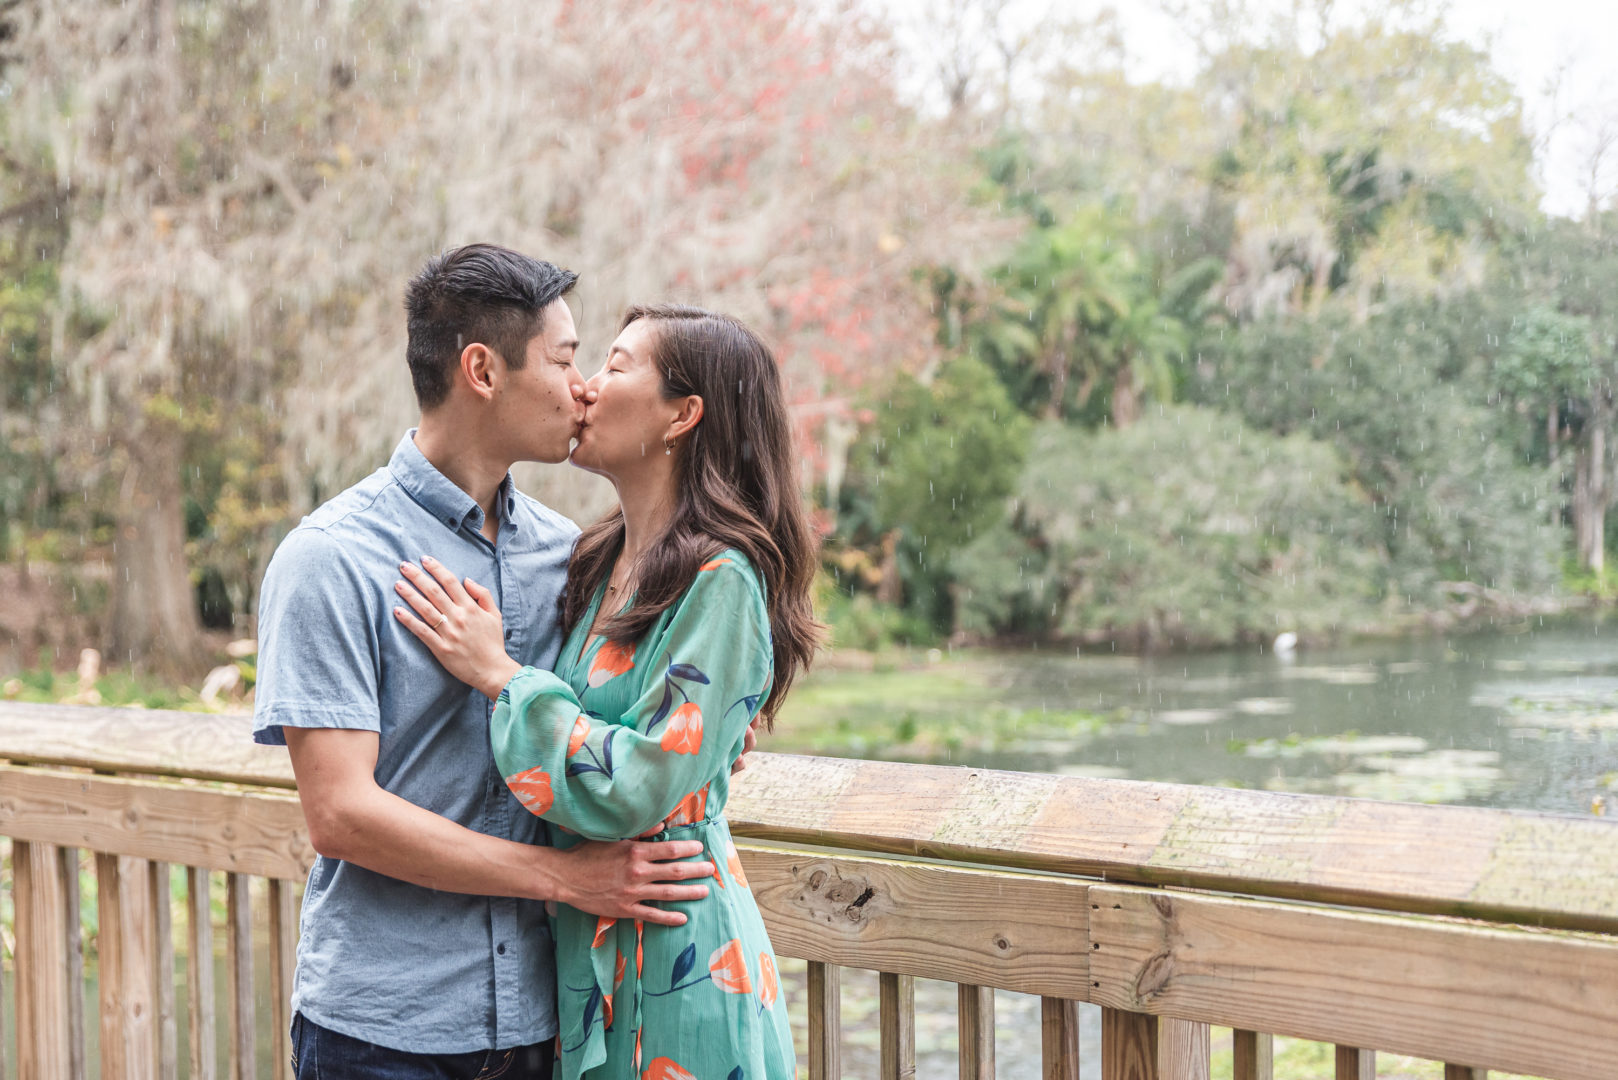 Tips for Engagement Session